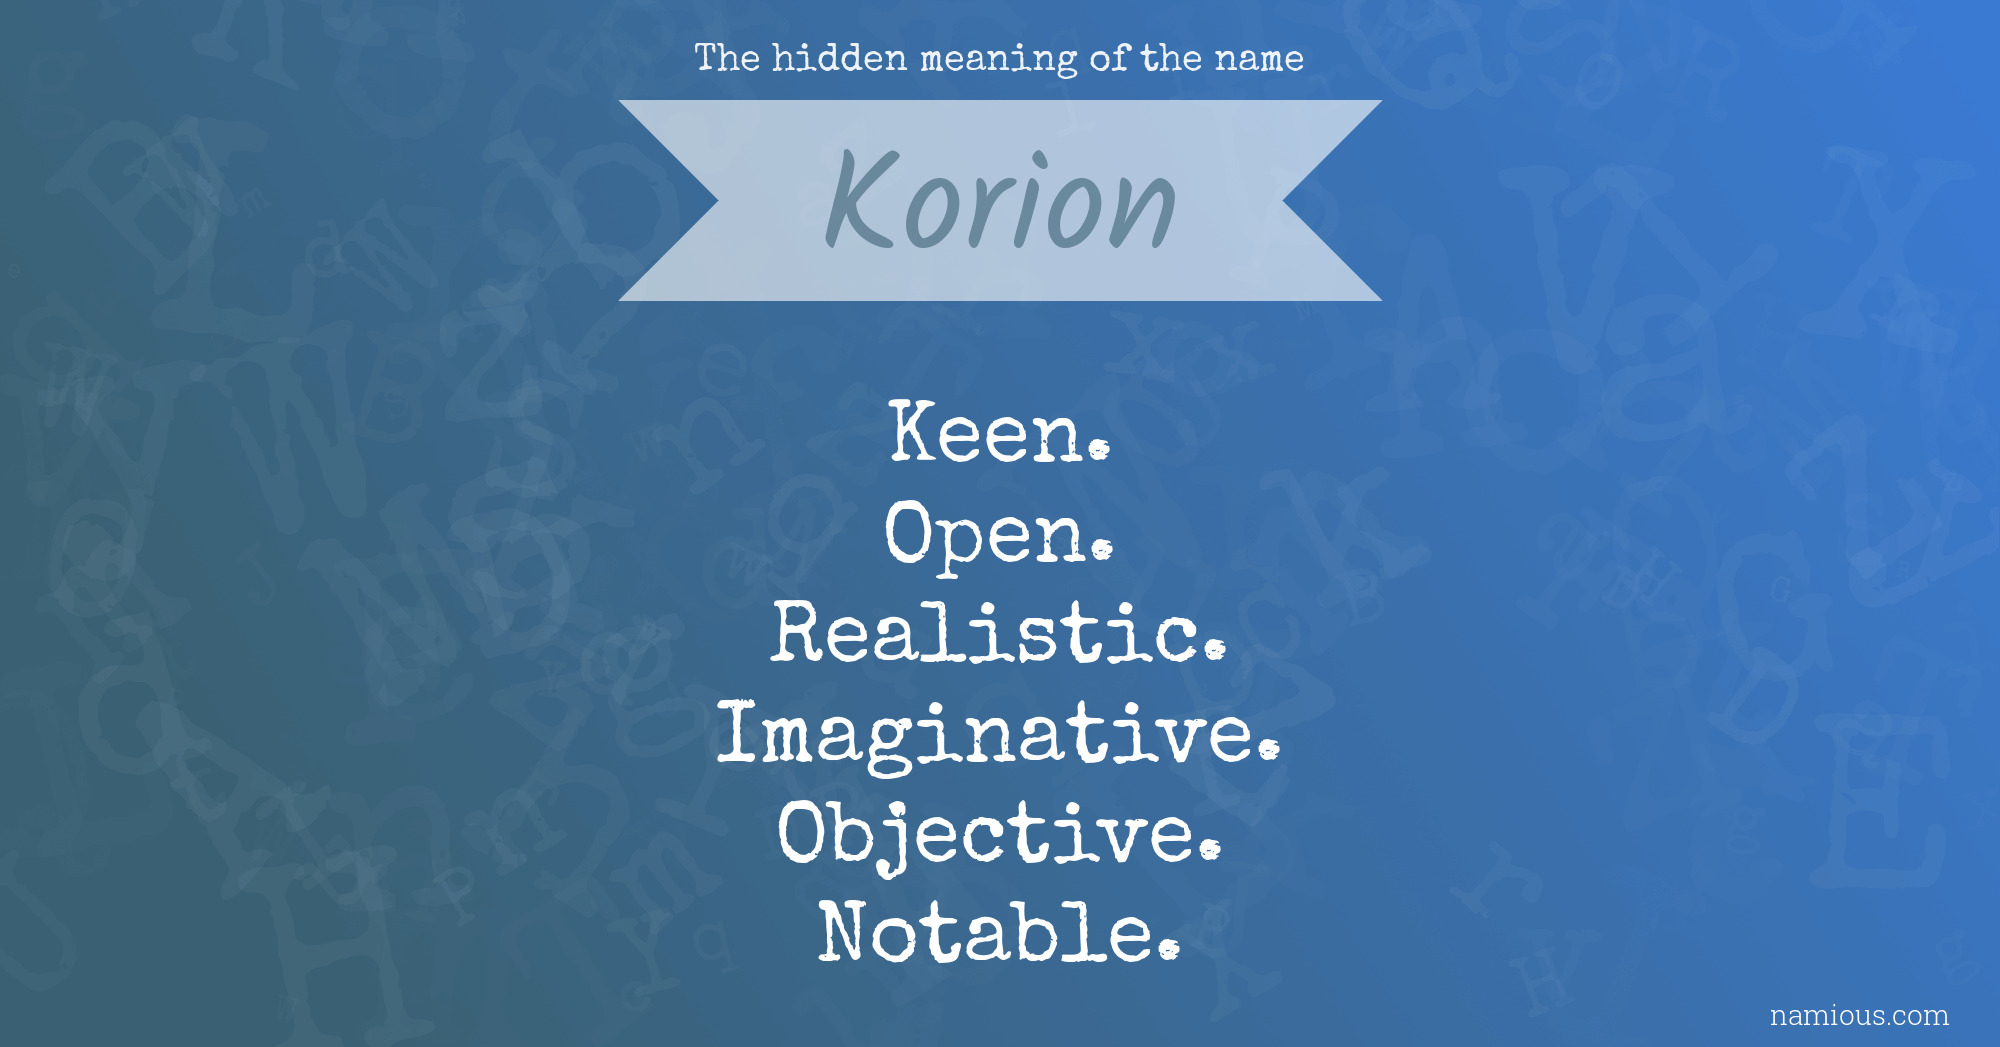 The hidden meaning of the name Korion